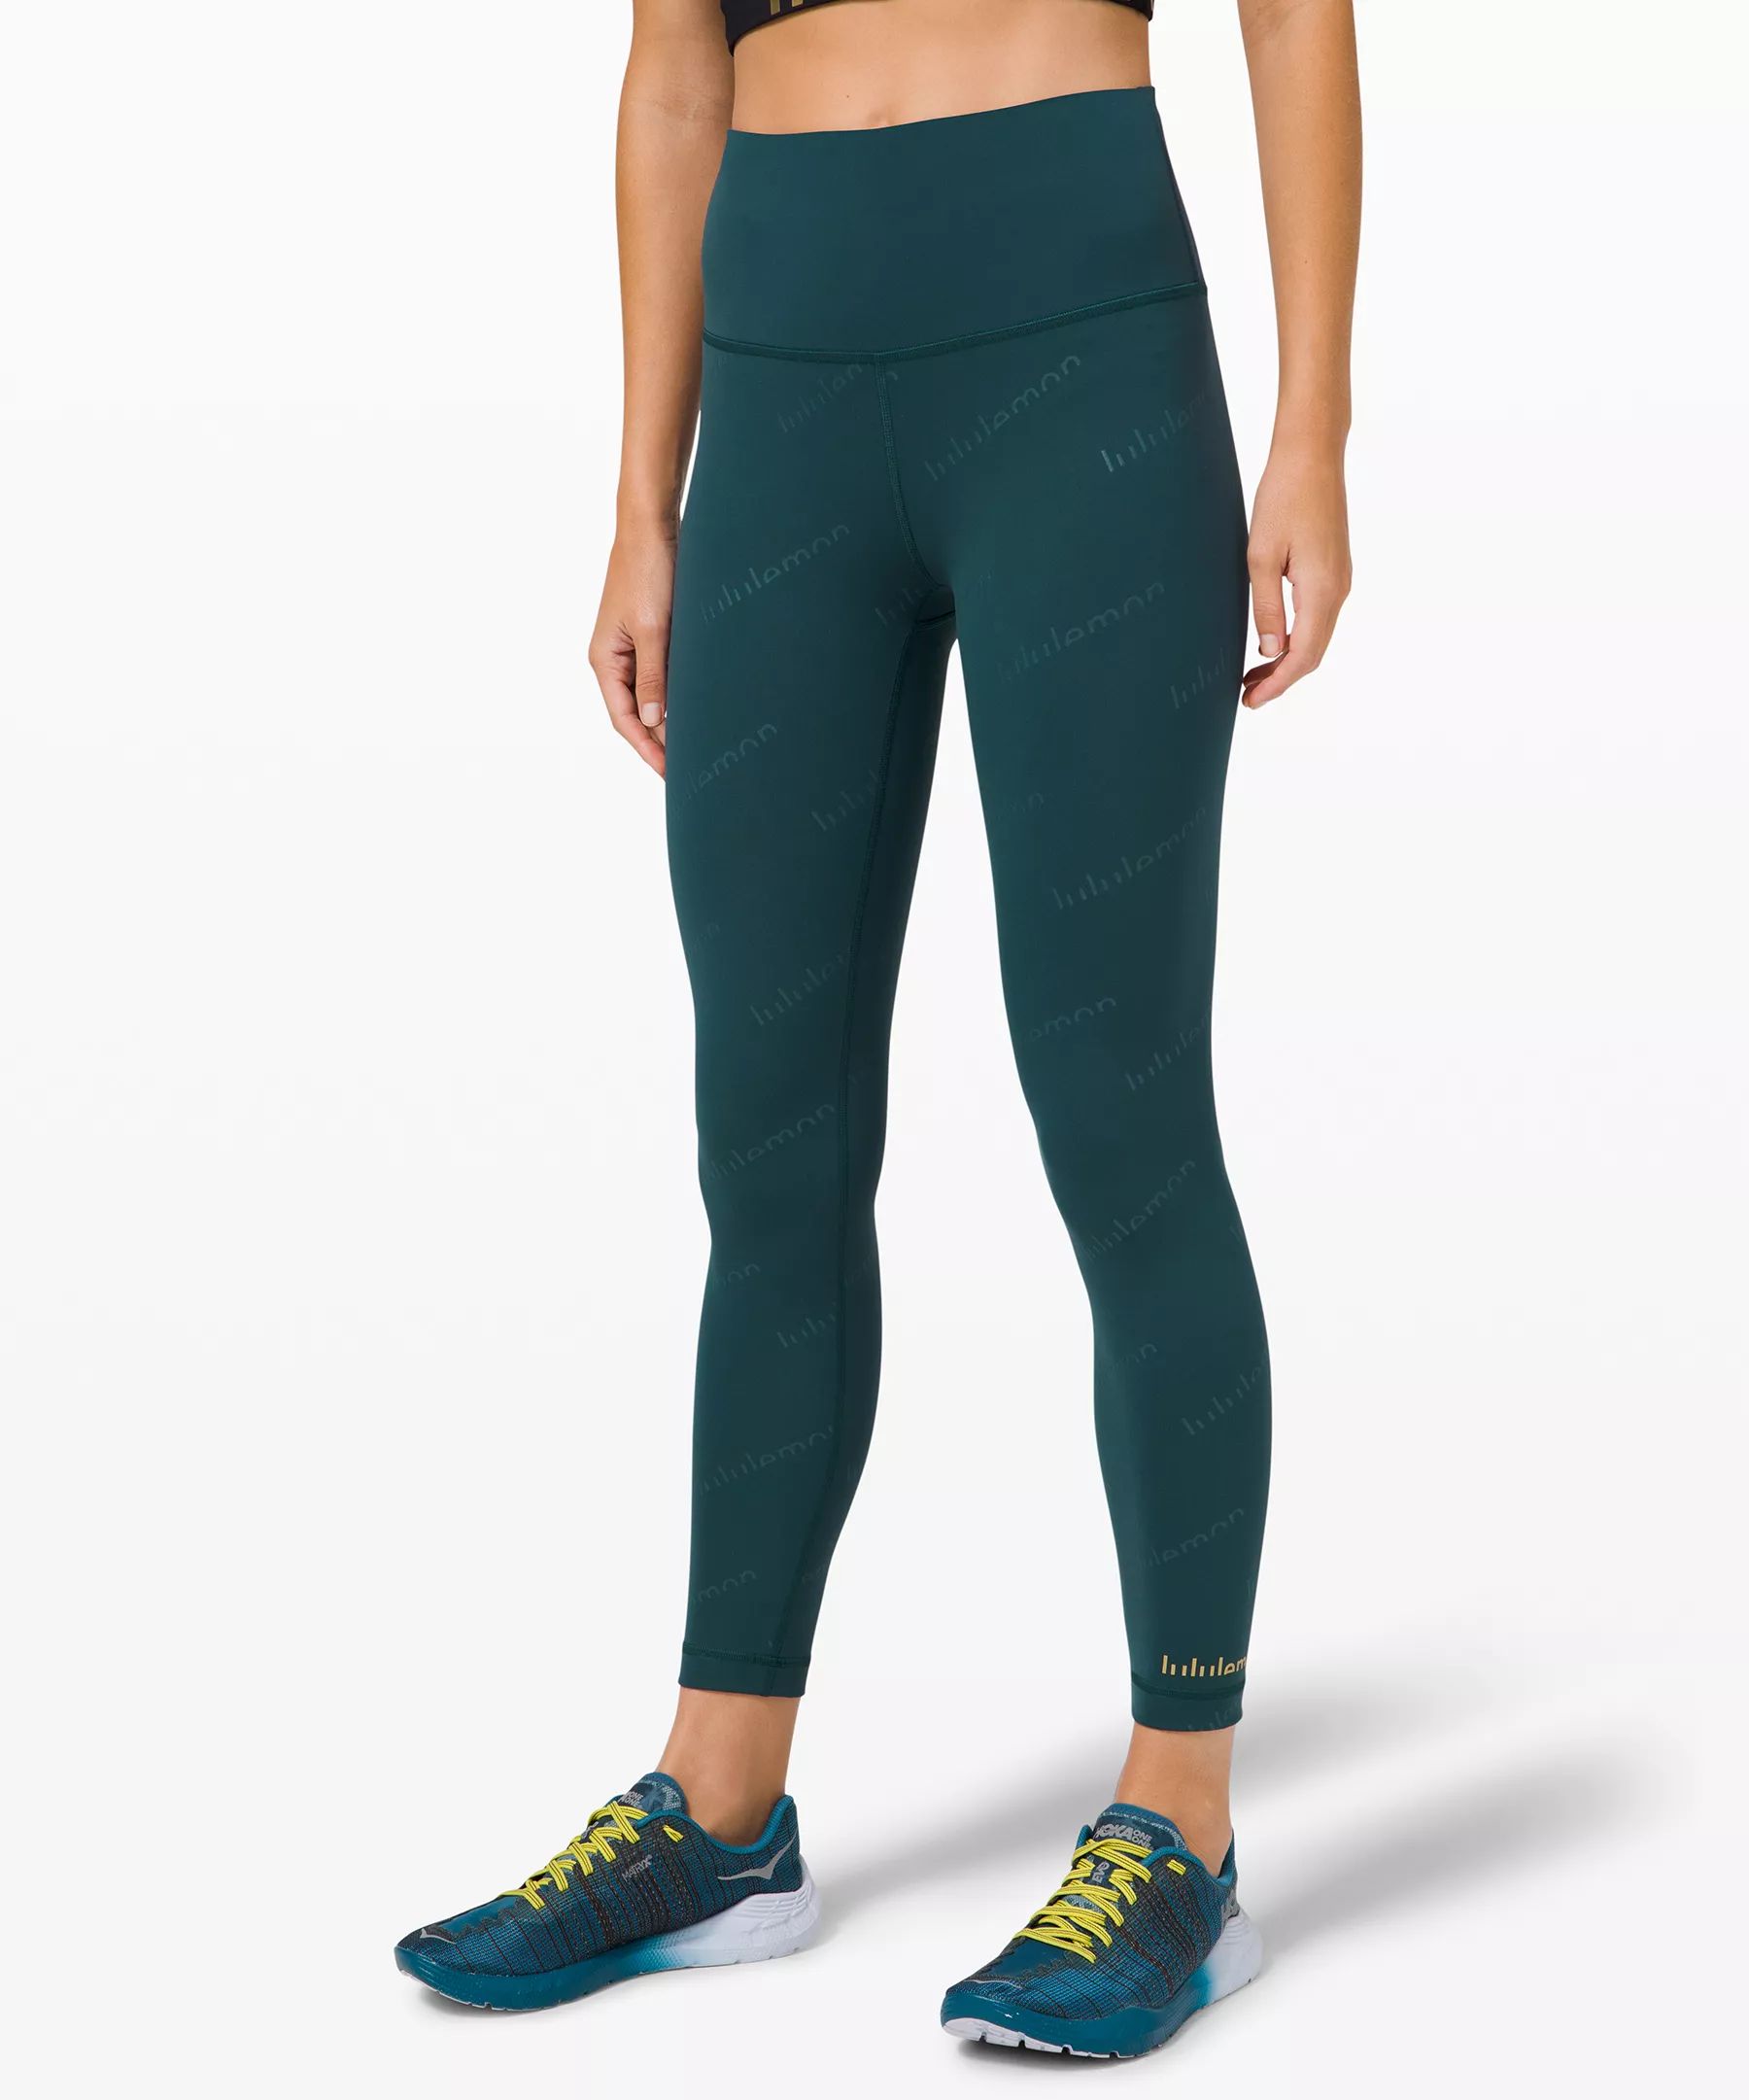 Wunder Train High-Rise Tight 25" Special Edition | Lululemon (US)